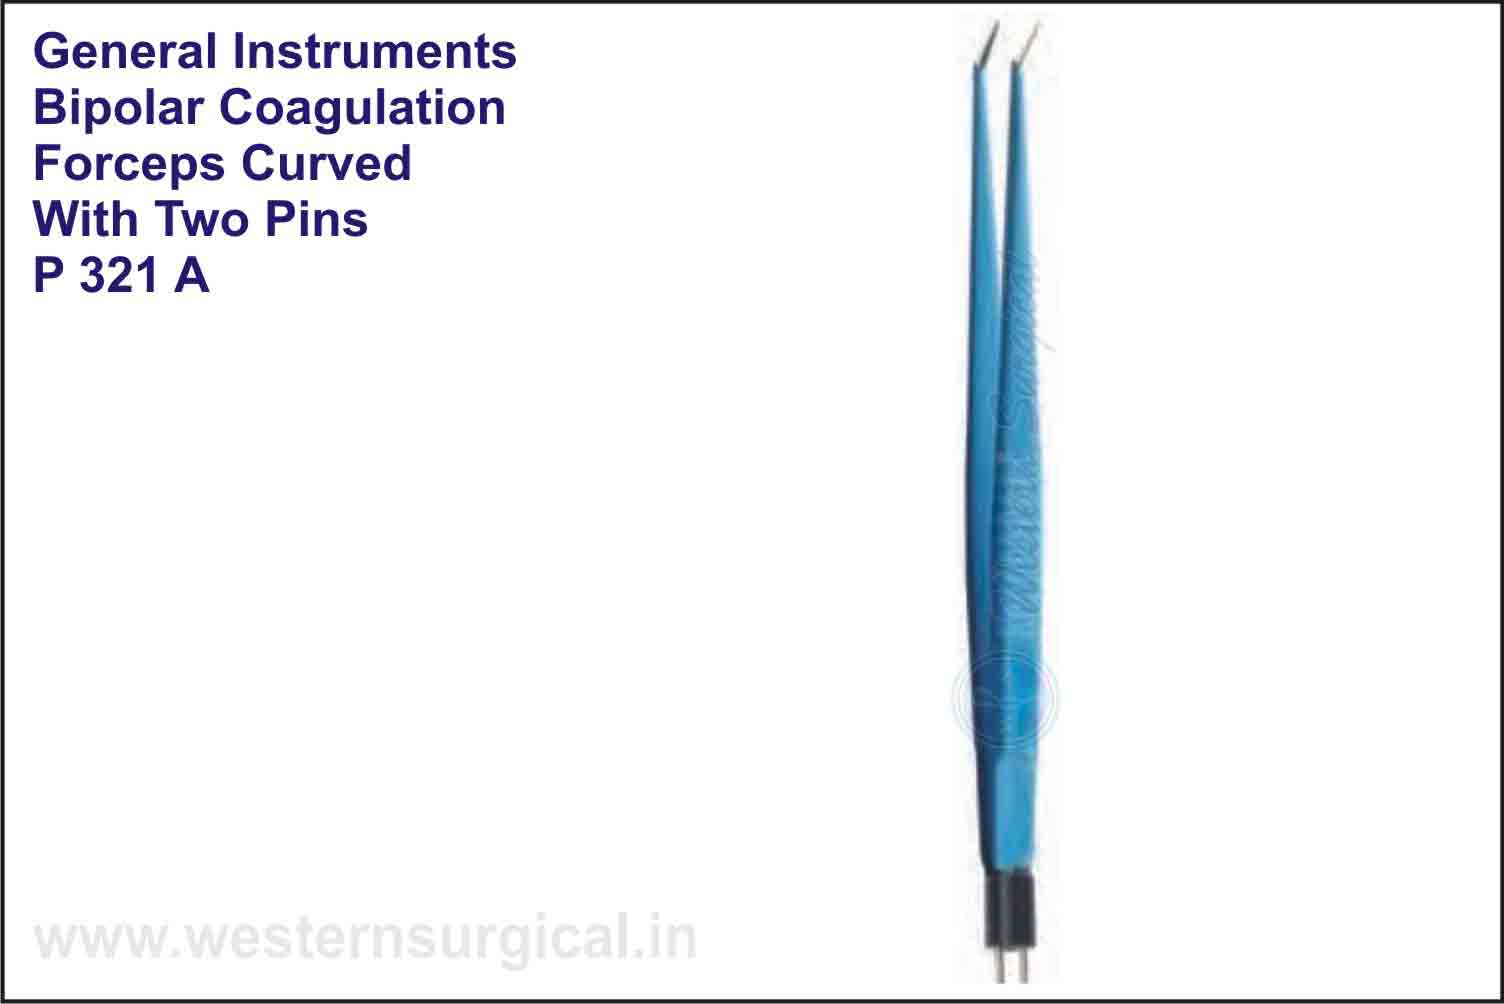 BIPOLAR COAGULATION FORCEPS CURVED WITH TWO PINS